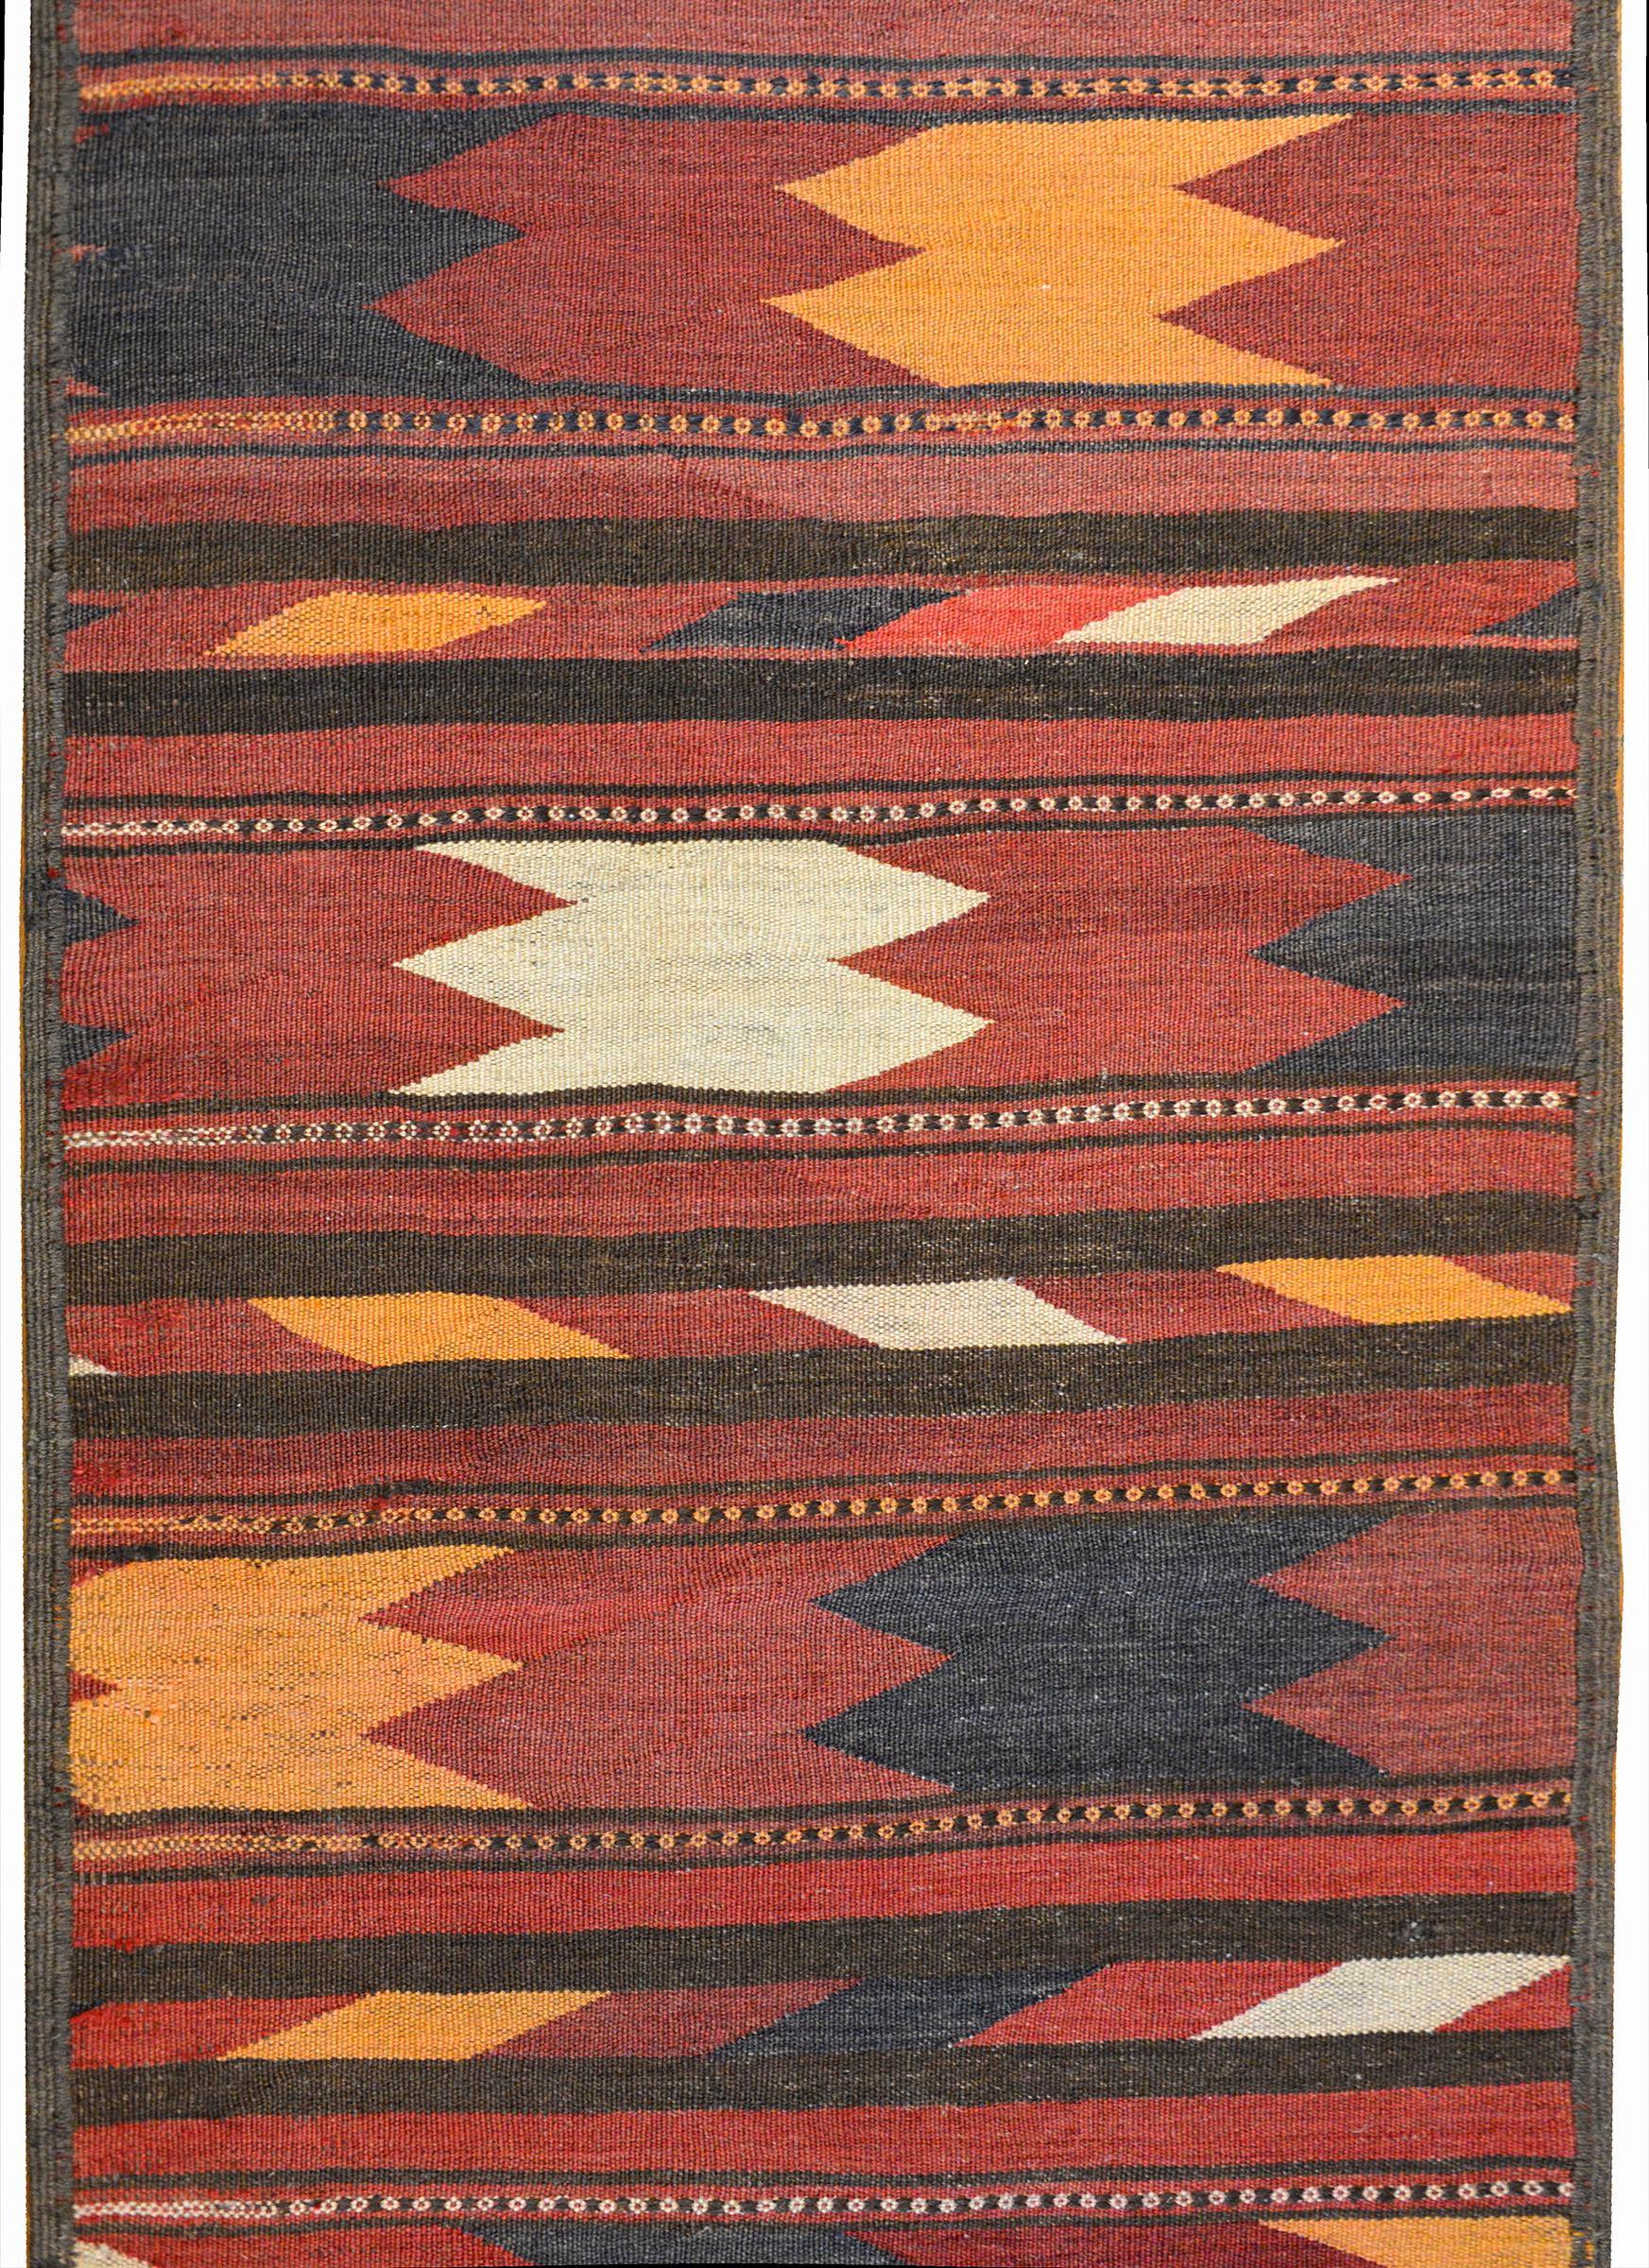 A striking vintage Afghani Baluchi runner with a wonderful bold pattern containing wide alternating zigzag stripes and solid colored stripes.